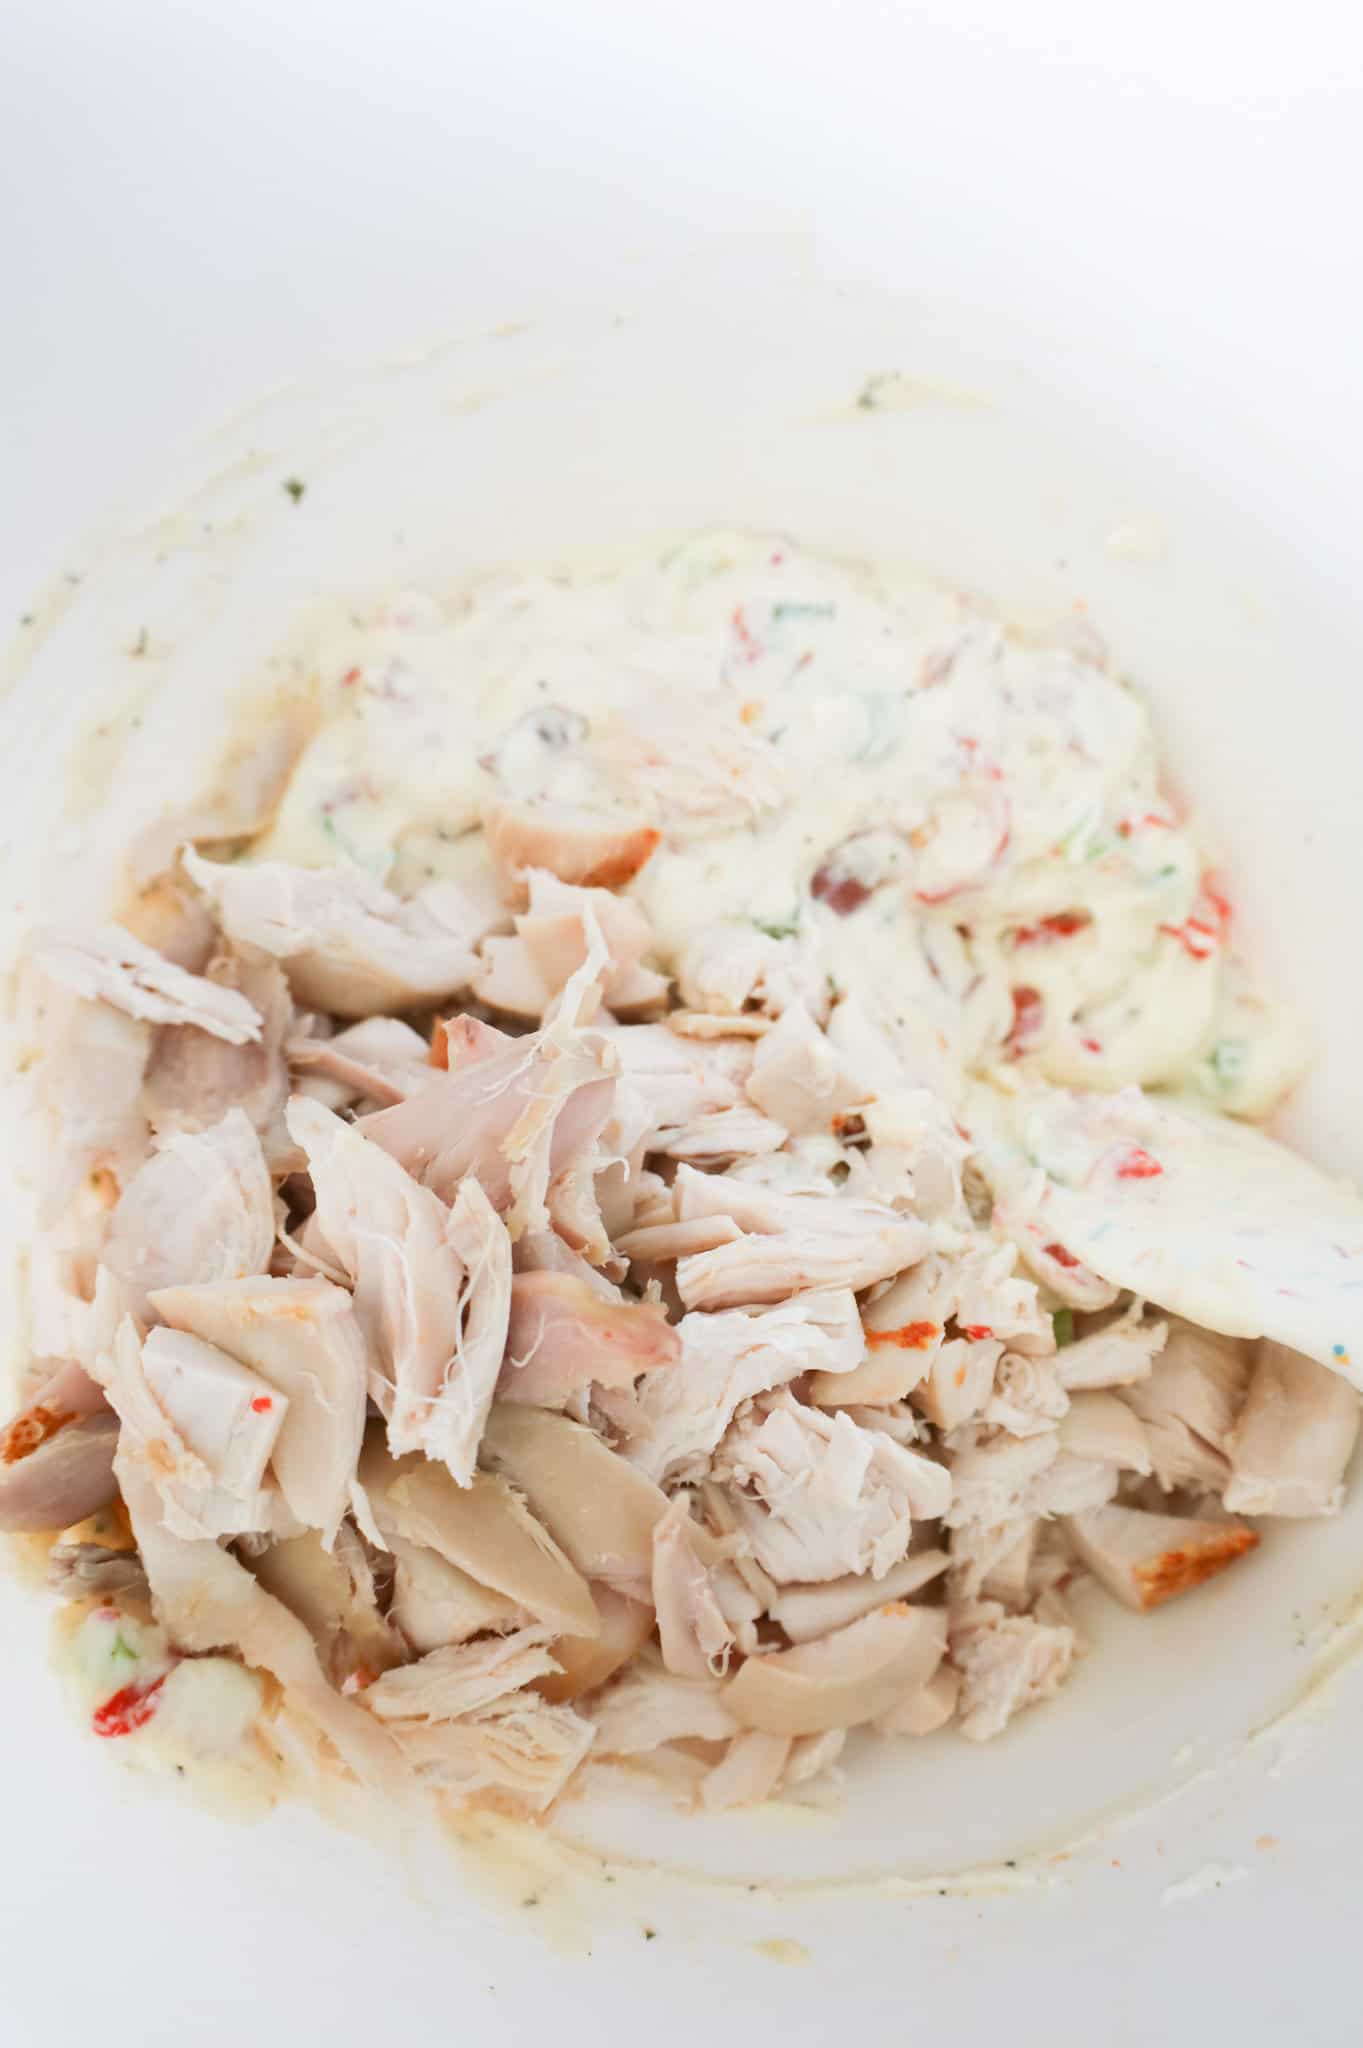 shredded rotisserie chicken on top of creamy mixture in a mixing bowl